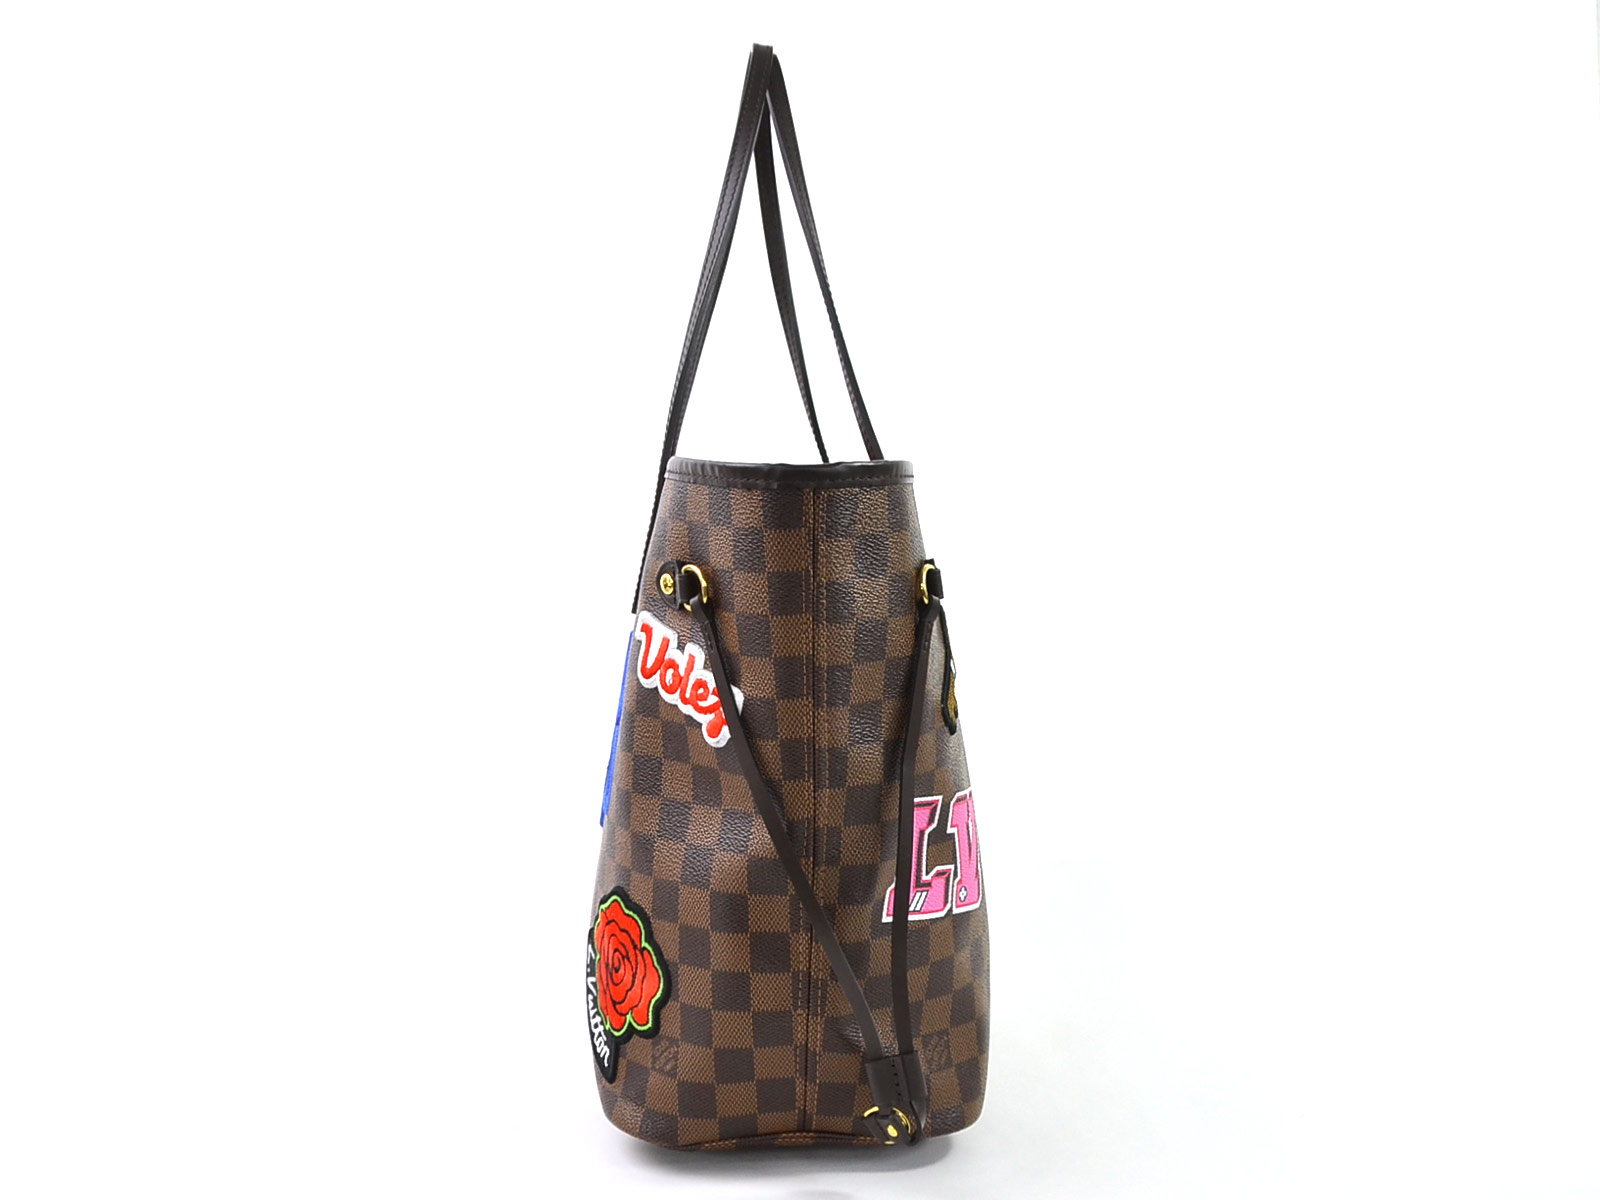 Auth Louis Vuitton Damier Neverfull MM Patches Tote Shoulder Bag N40049 - 97872c | eBay